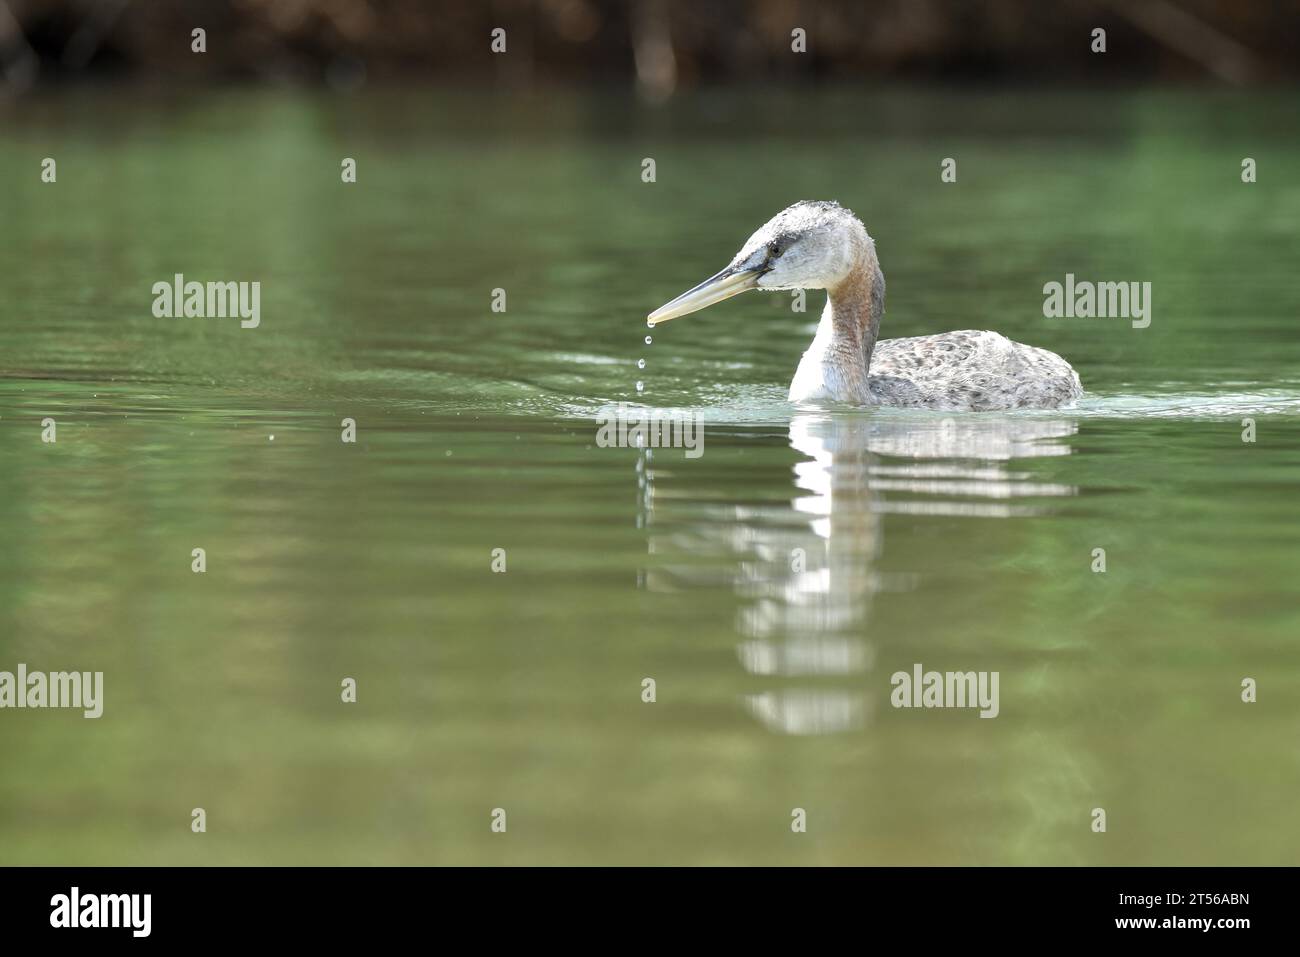 A great grebe (Podiceps major) in the wild in a park in Buenos Aires, Argentina, South America Stock Photo